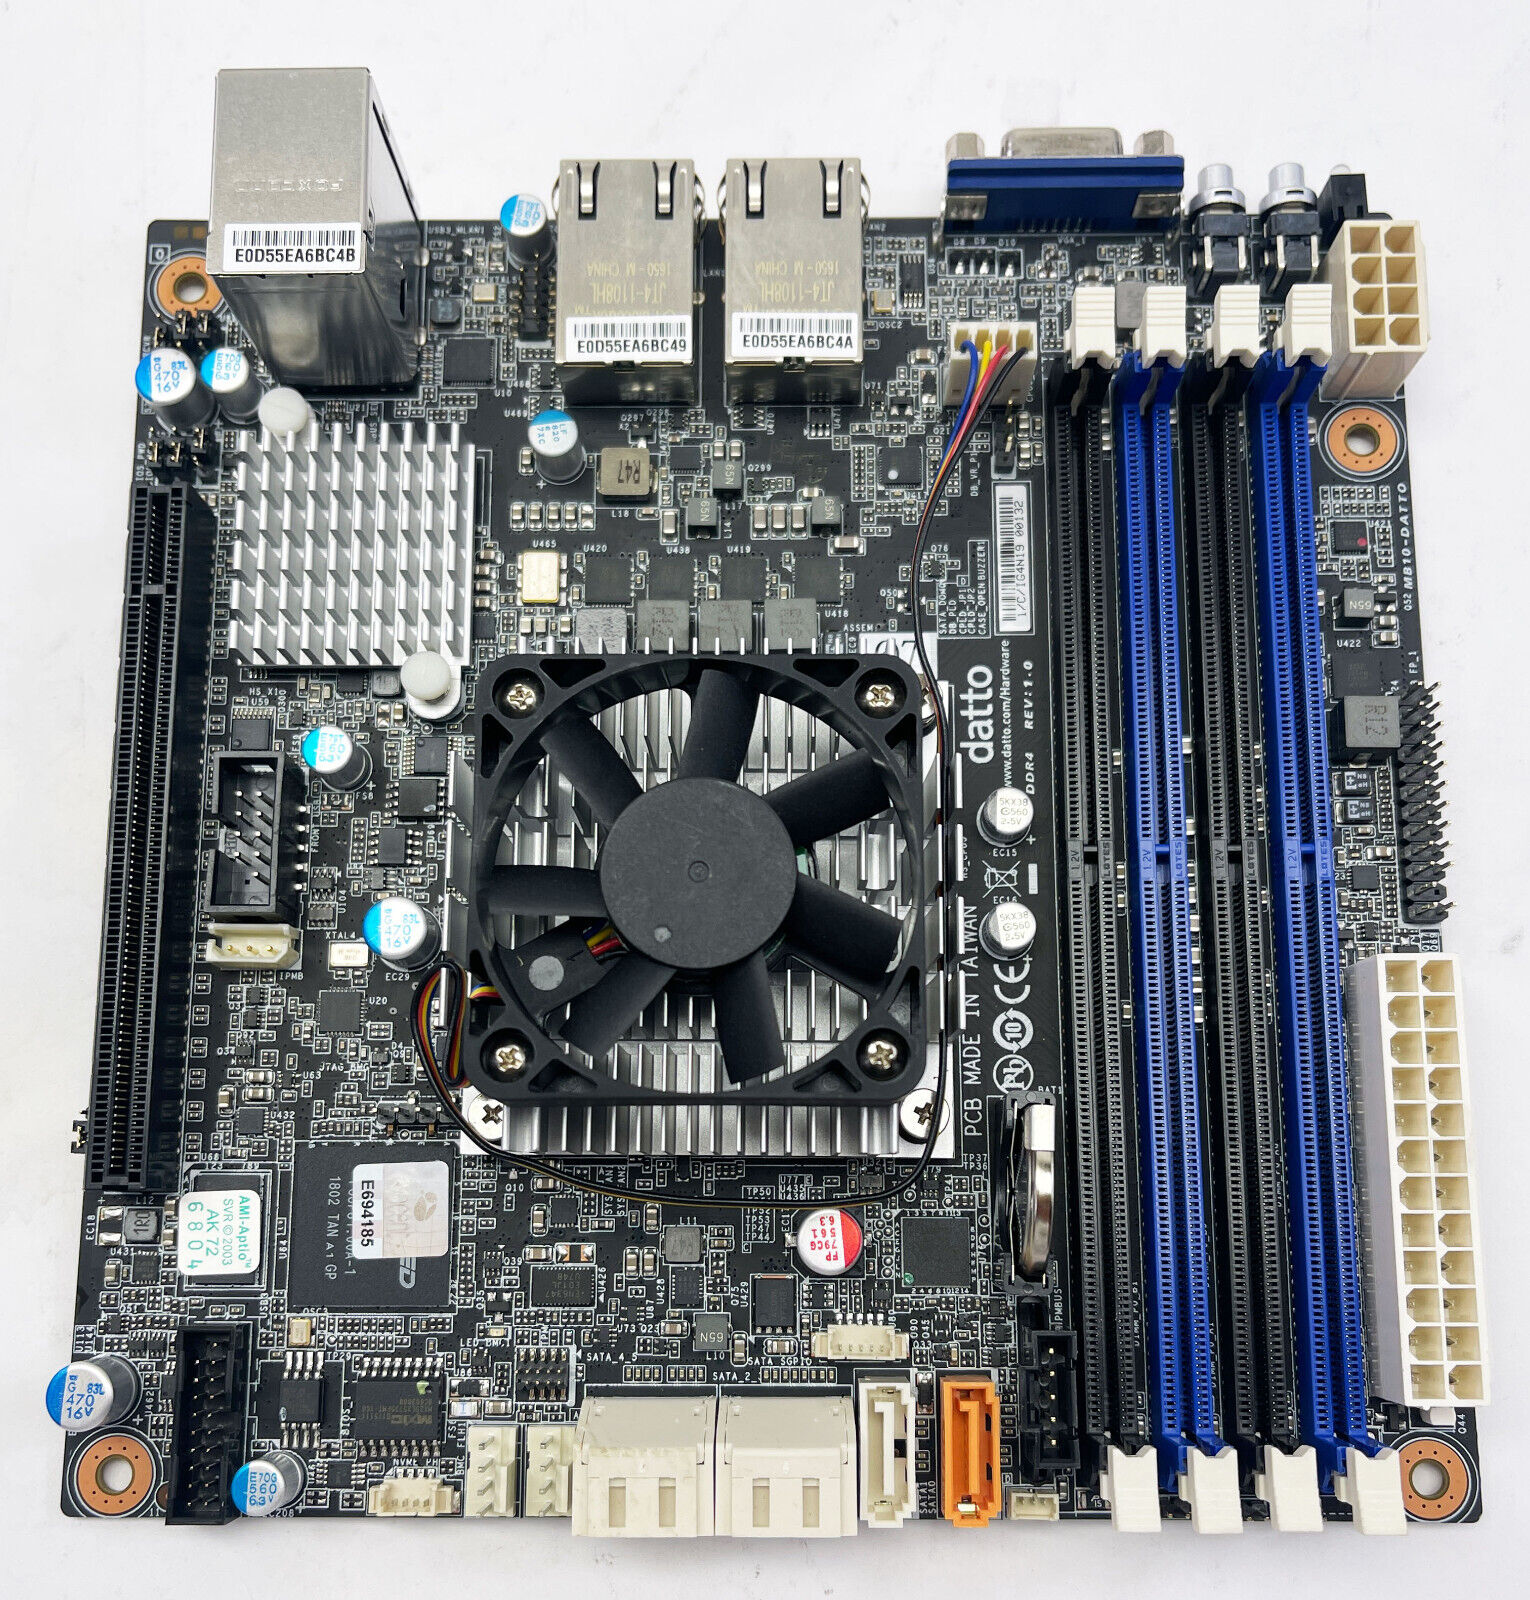 GIGABYTE MB10-Datto Motherboard Xeon D-1521- SR2DF 2.40 GHz-I/O Shield-Open Box